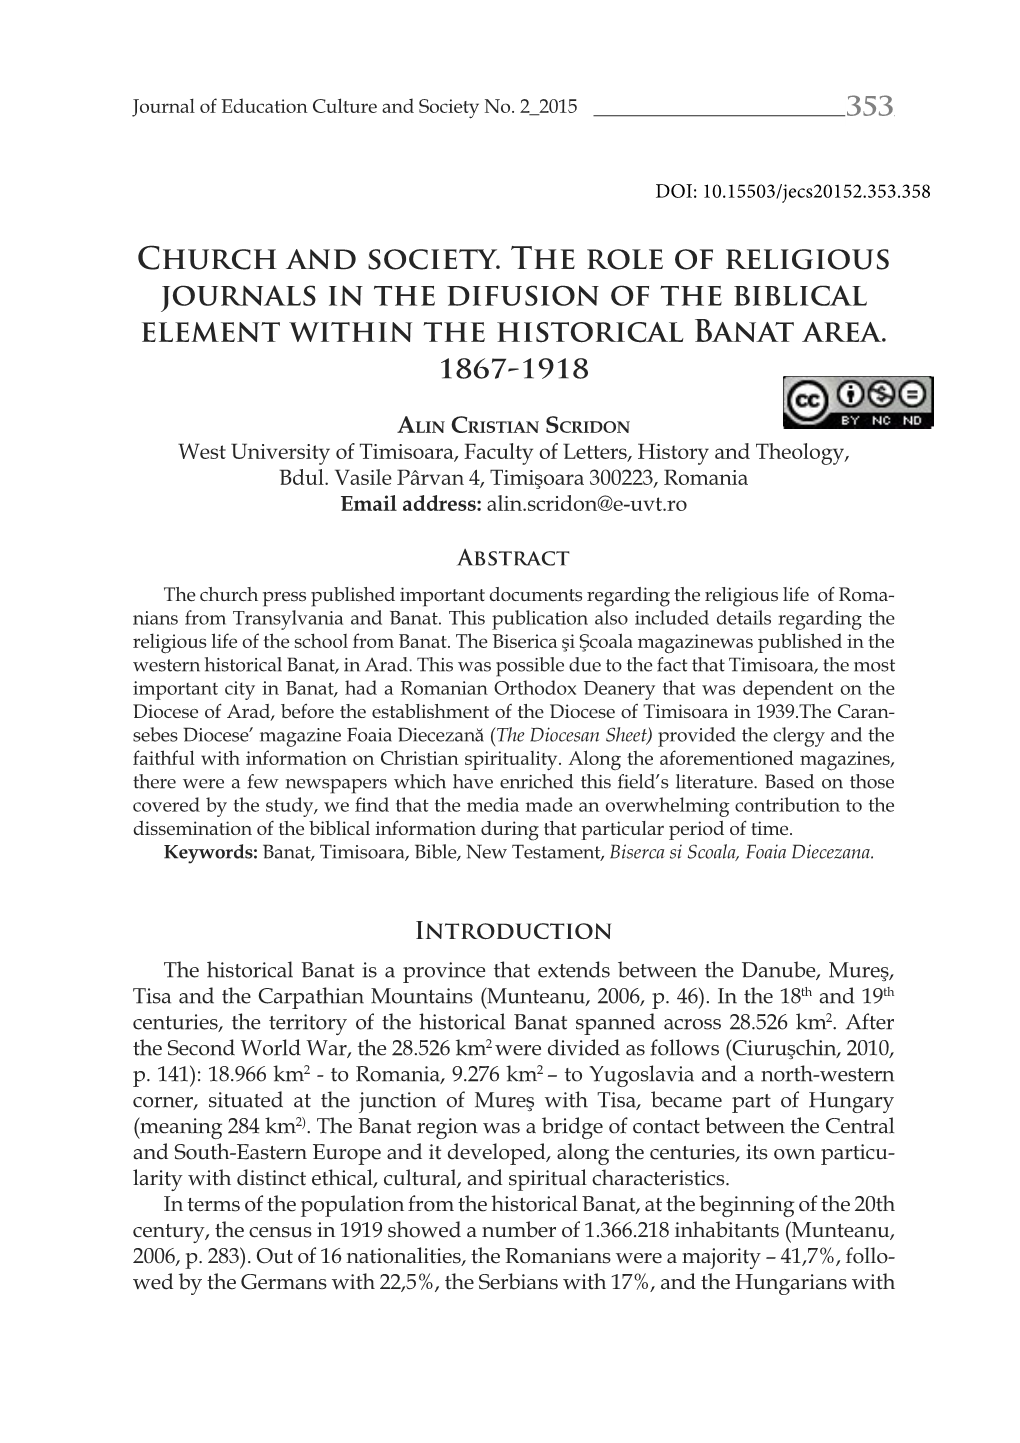 Church and Society. the Role of Religious Journals in the Difusion of the Biblical Element Within the Historical Banat Area. !"#$-!%!"